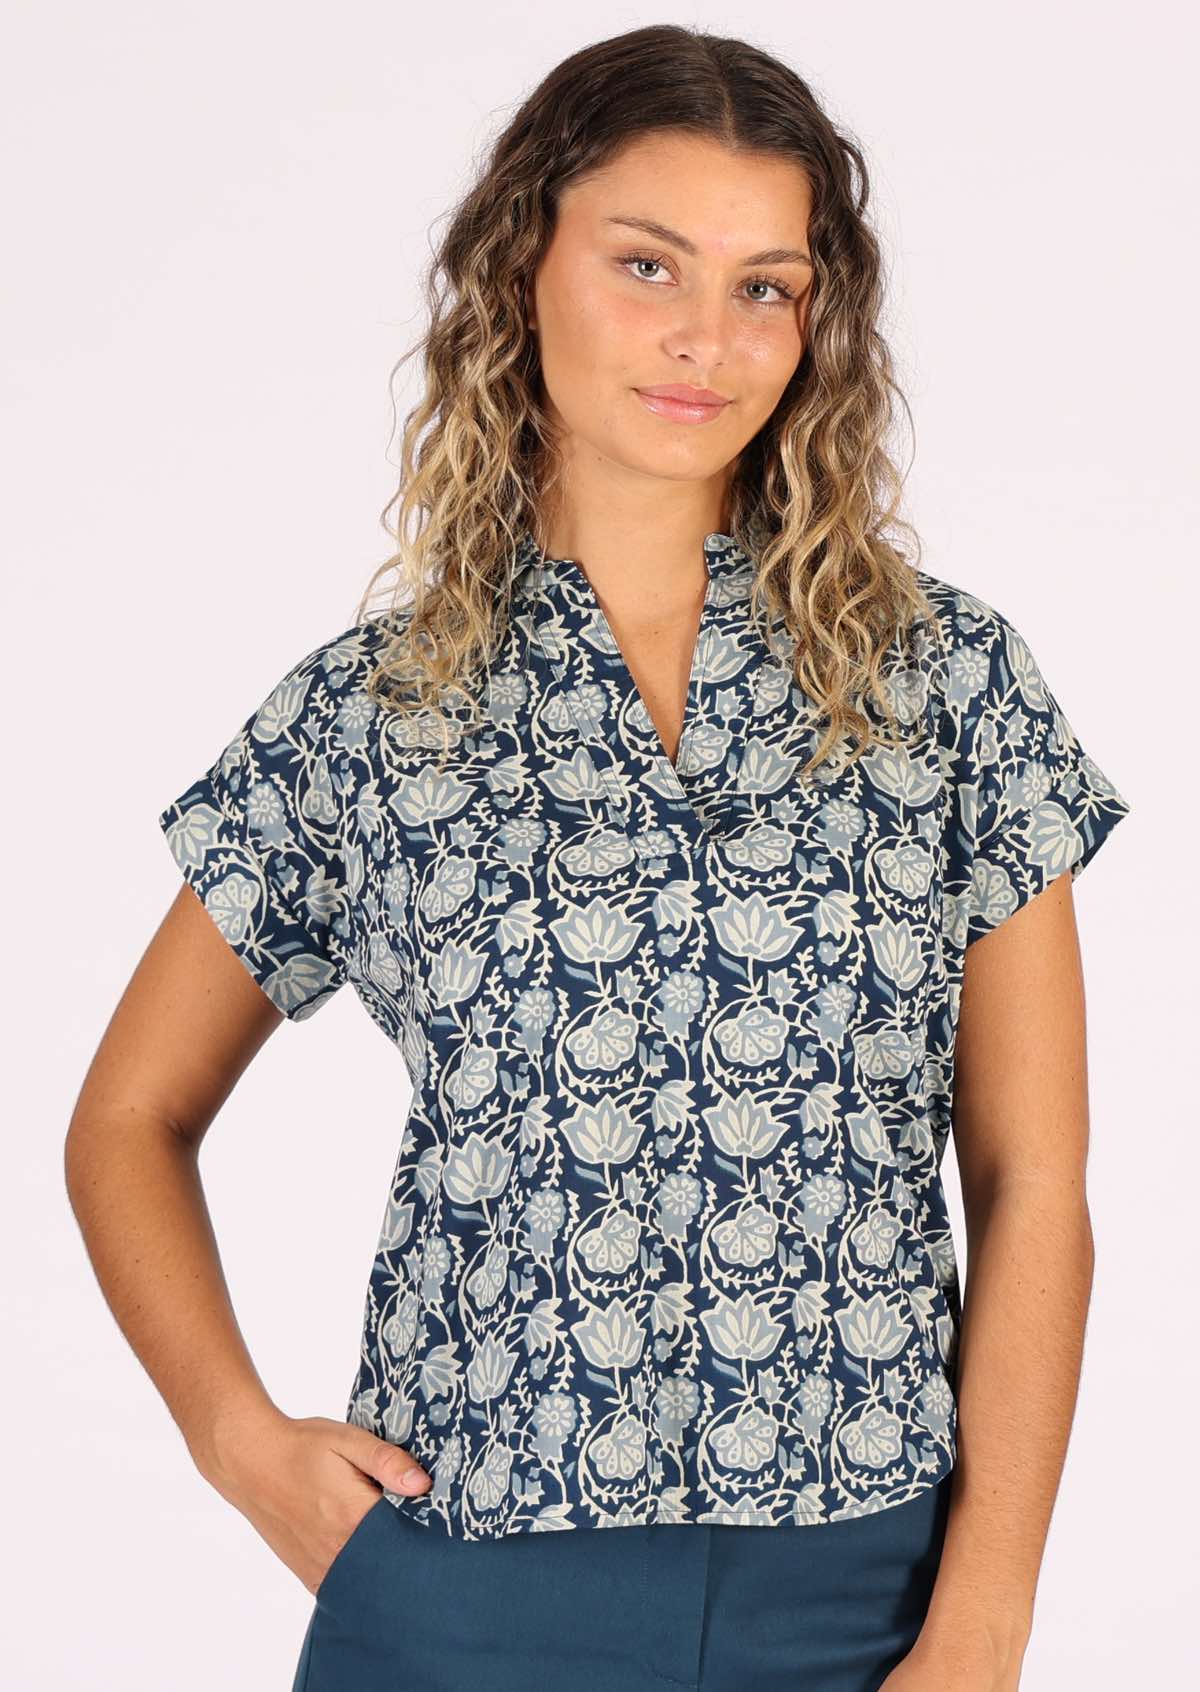 Relaxed fit cotton top with collar